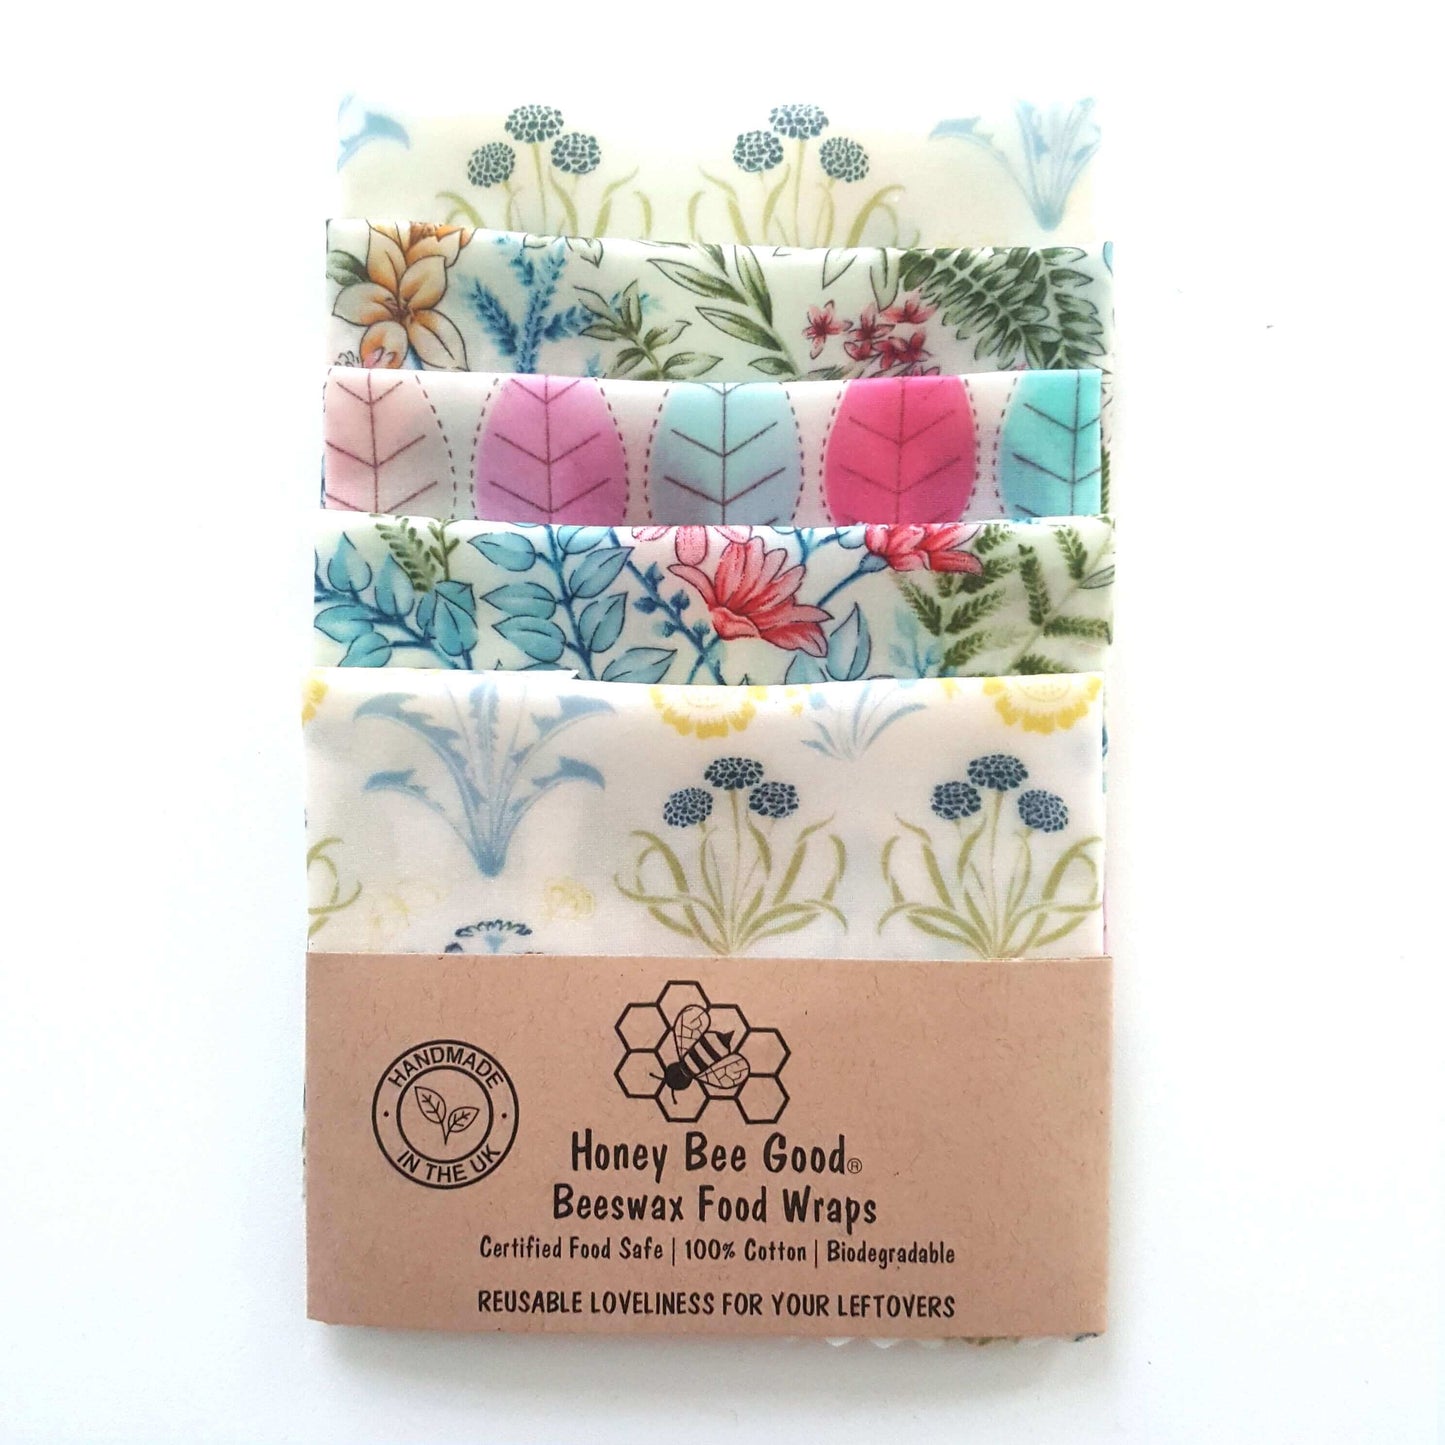 Reusable Beeswax Food Wraps 100% Hand Made in the UK by Honey Bee Good shown in Set of 5 Smalls